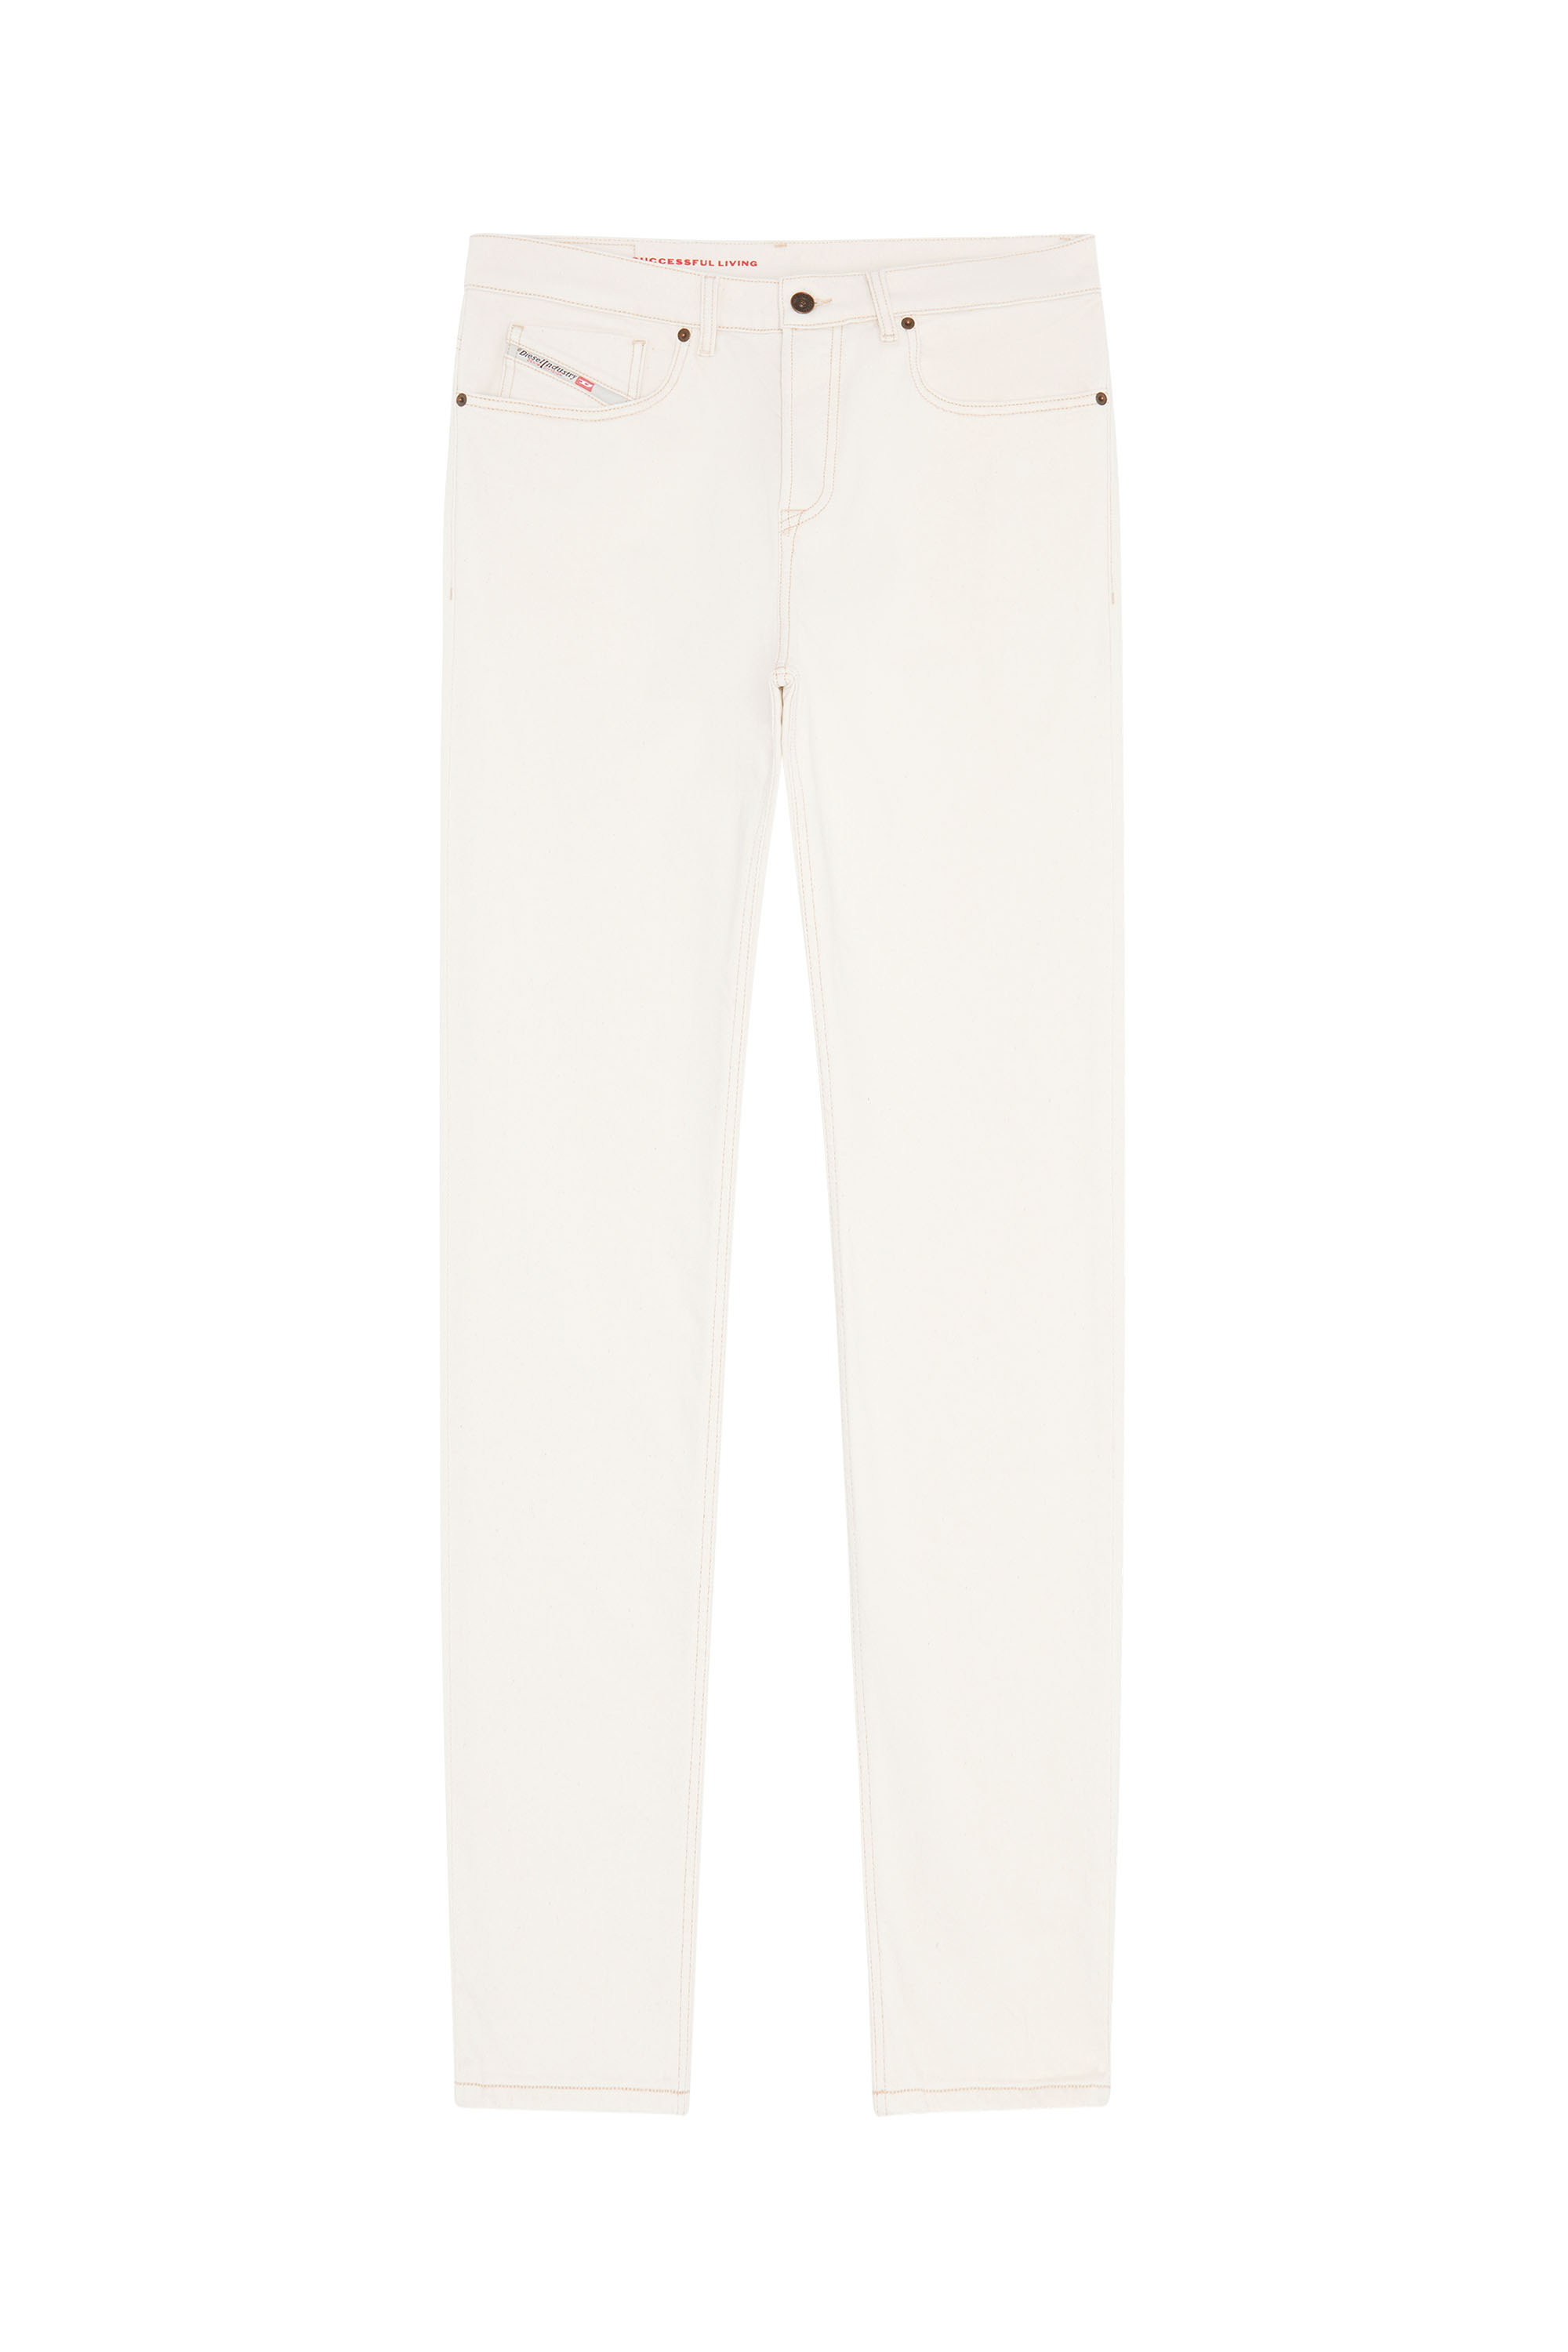 2005 D-FINING 09B94 Tapered Jeans, White - Jeans